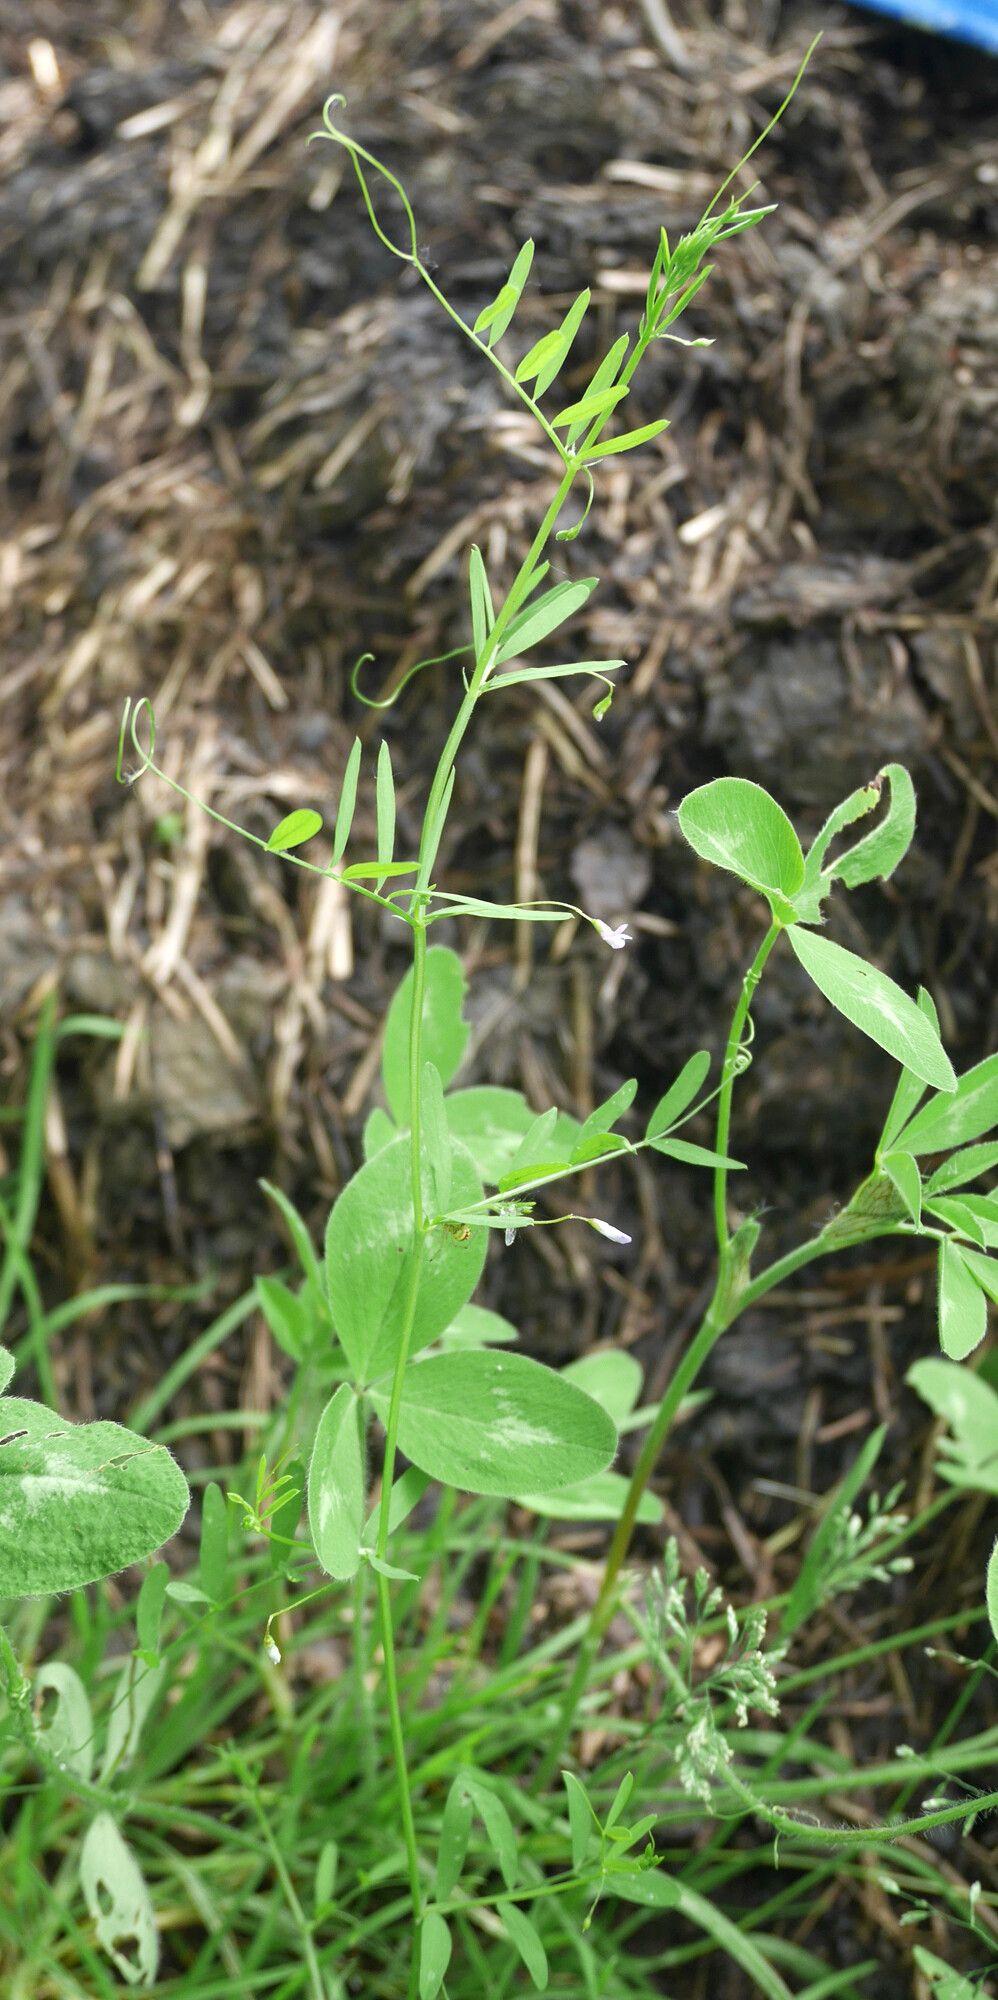 Four-seed vetch